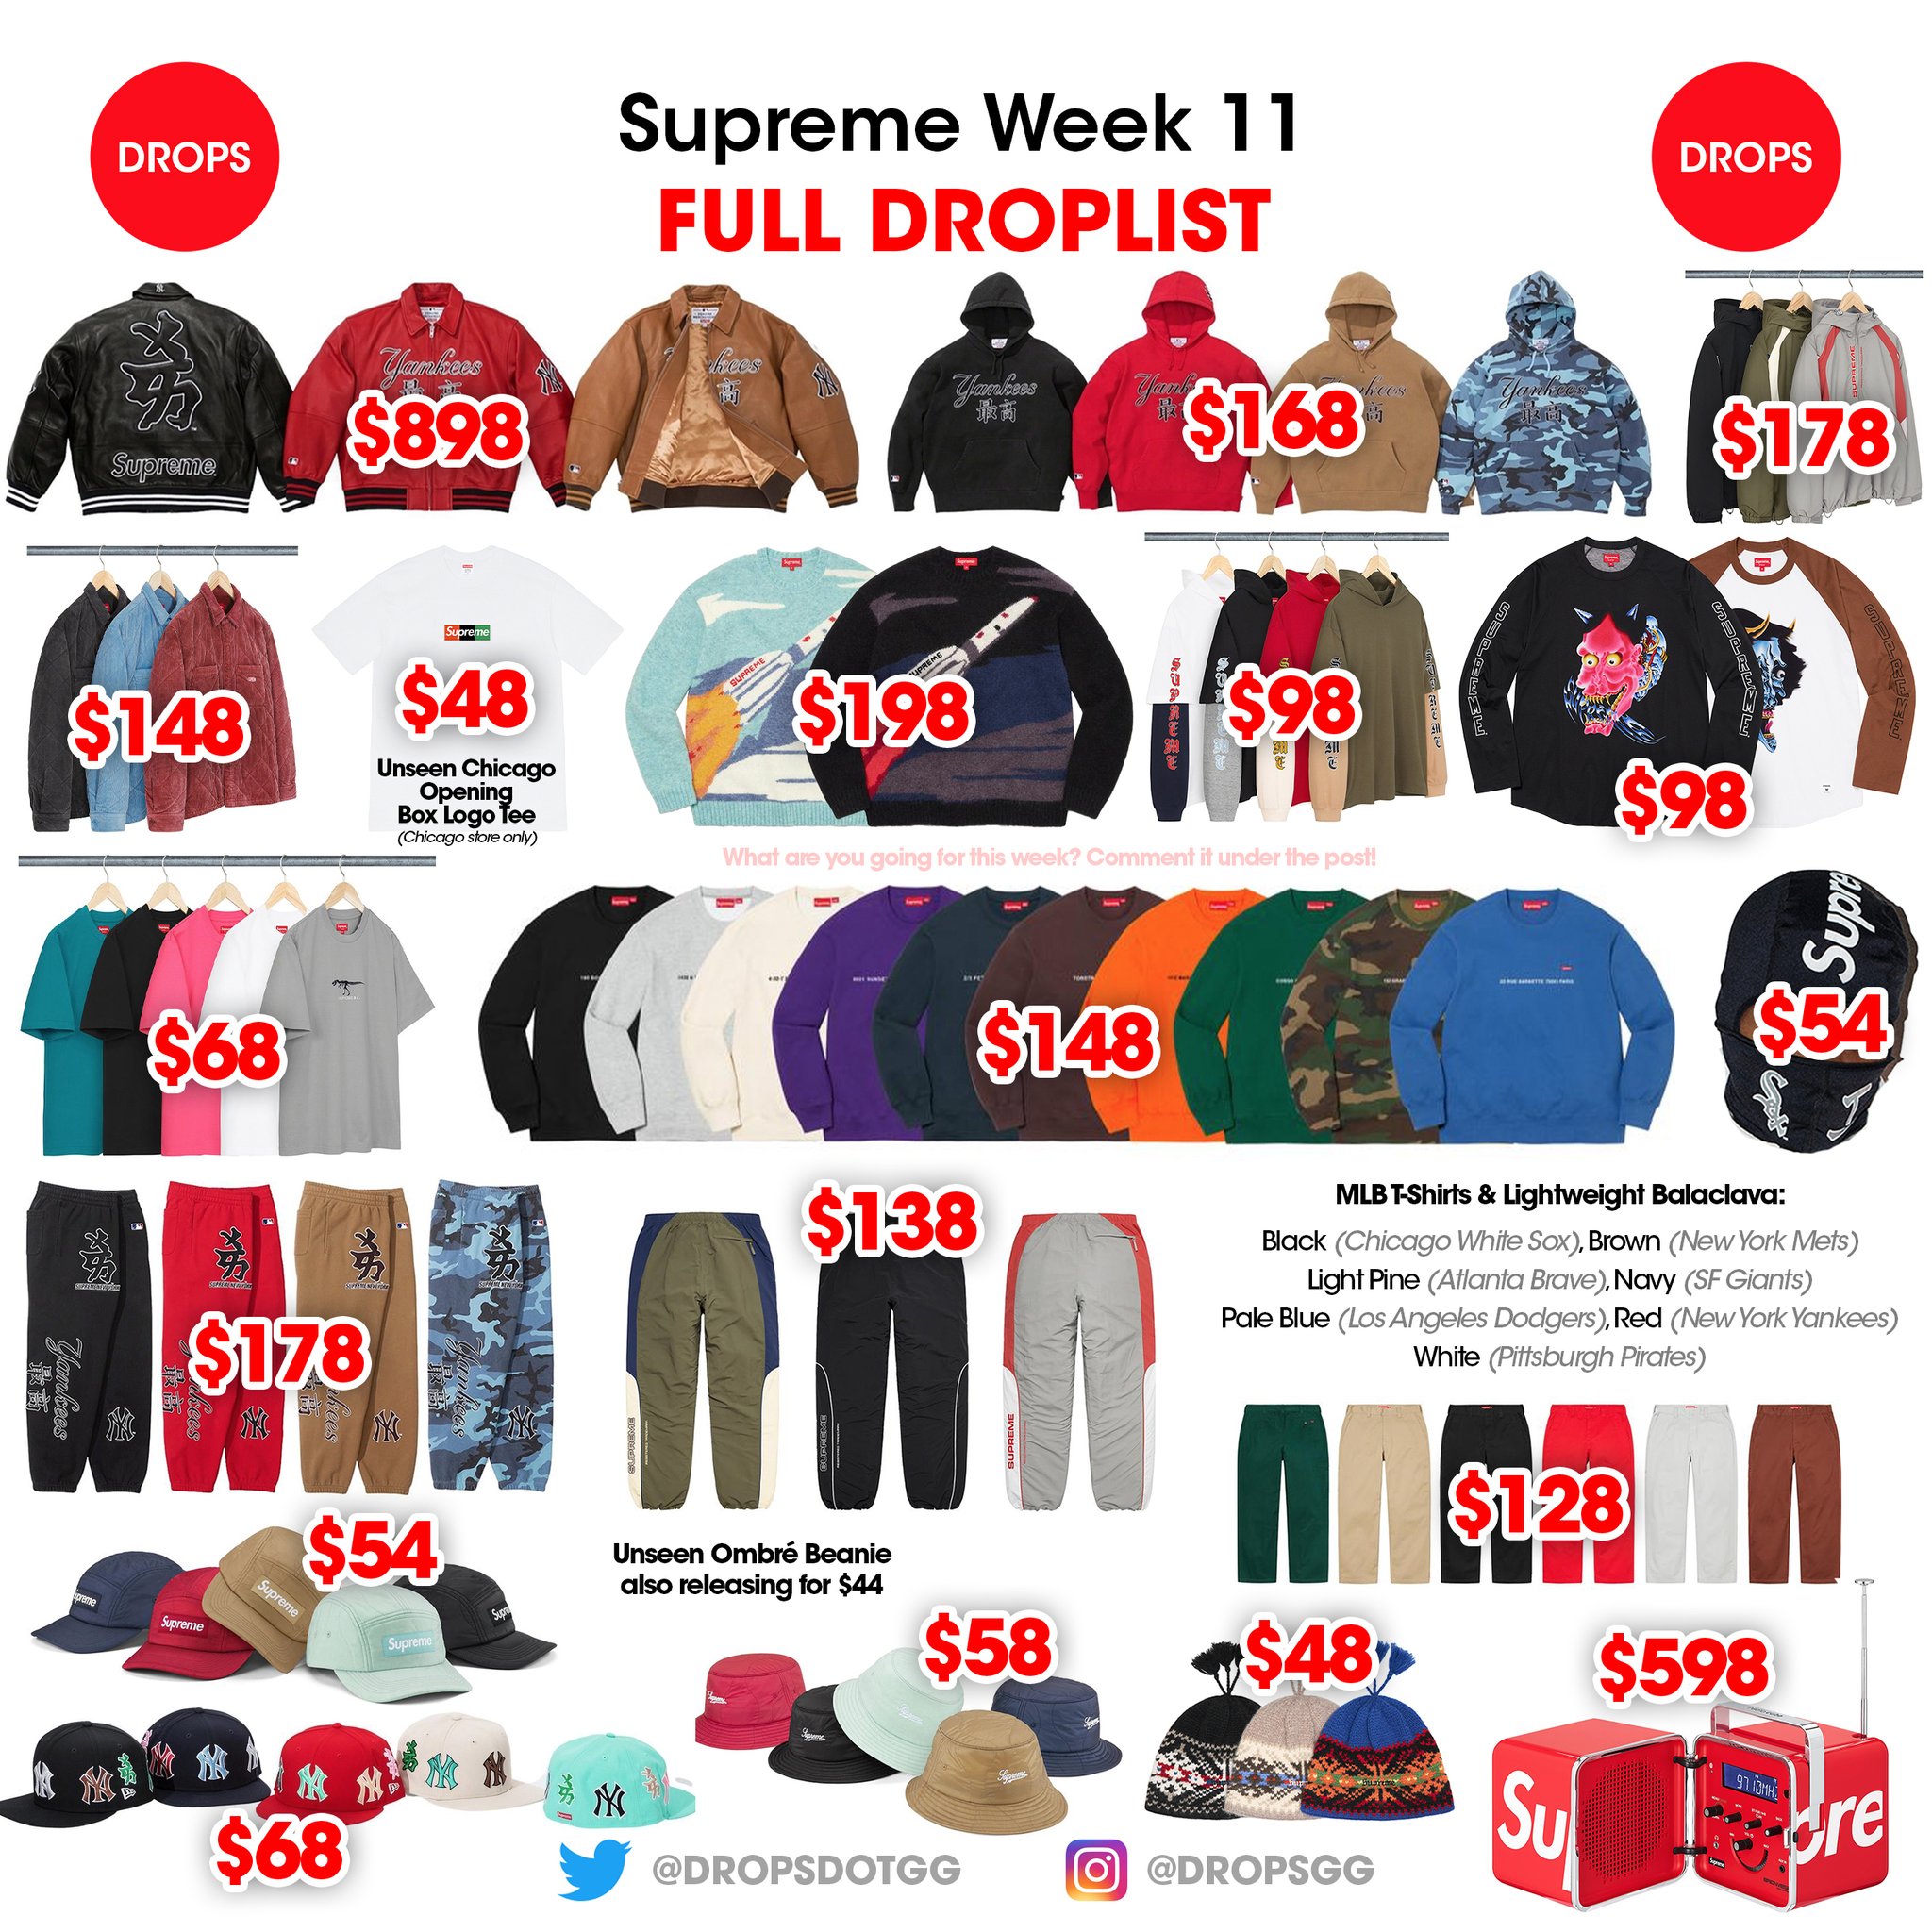 Prices and Droplist 29th June 23 - Week 19 - Supreme